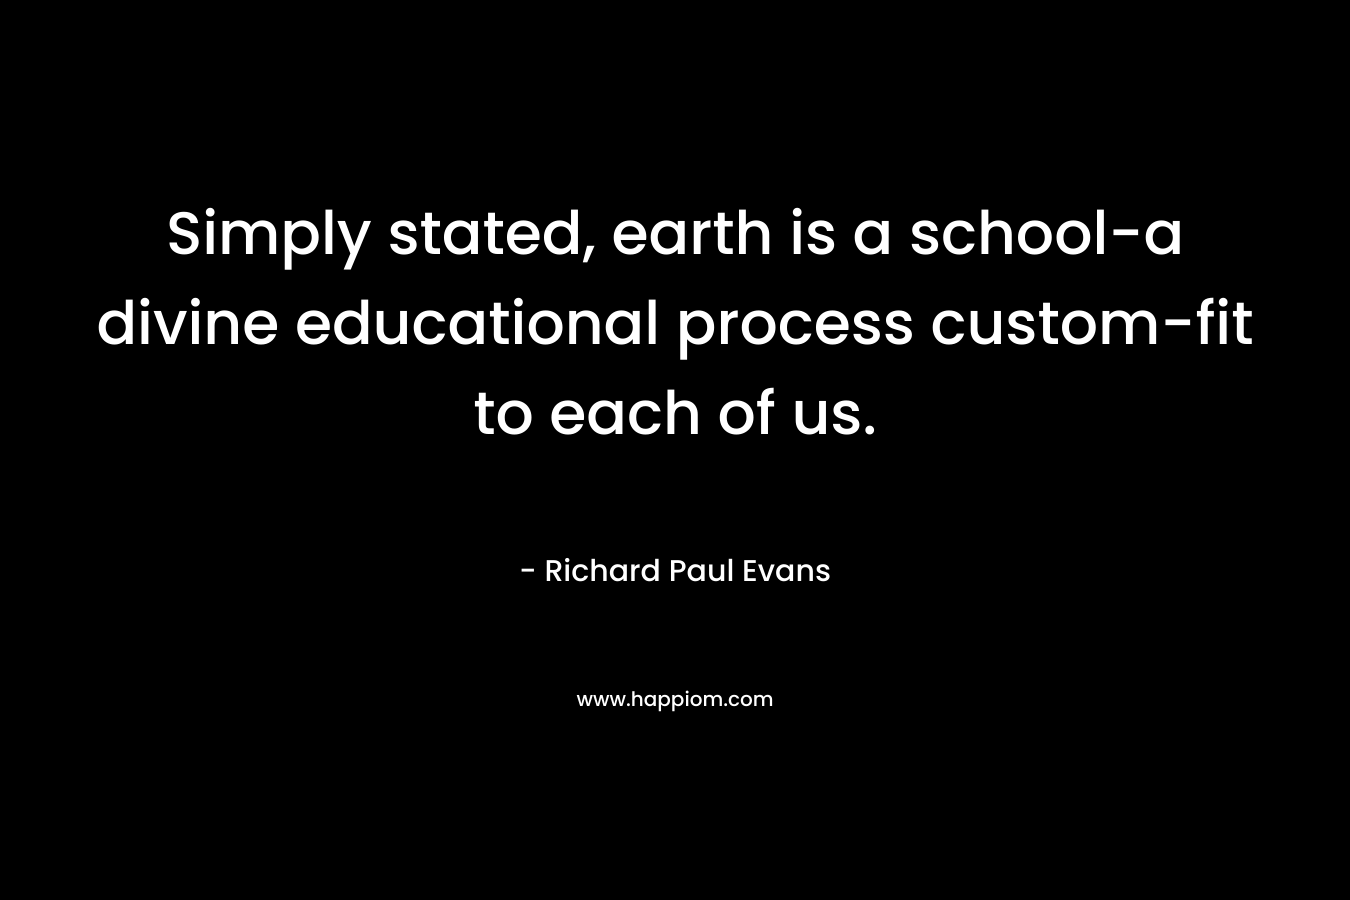 Simply stated, earth is a school-a divine educational process custom-fit to each of us. – Richard Paul Evans